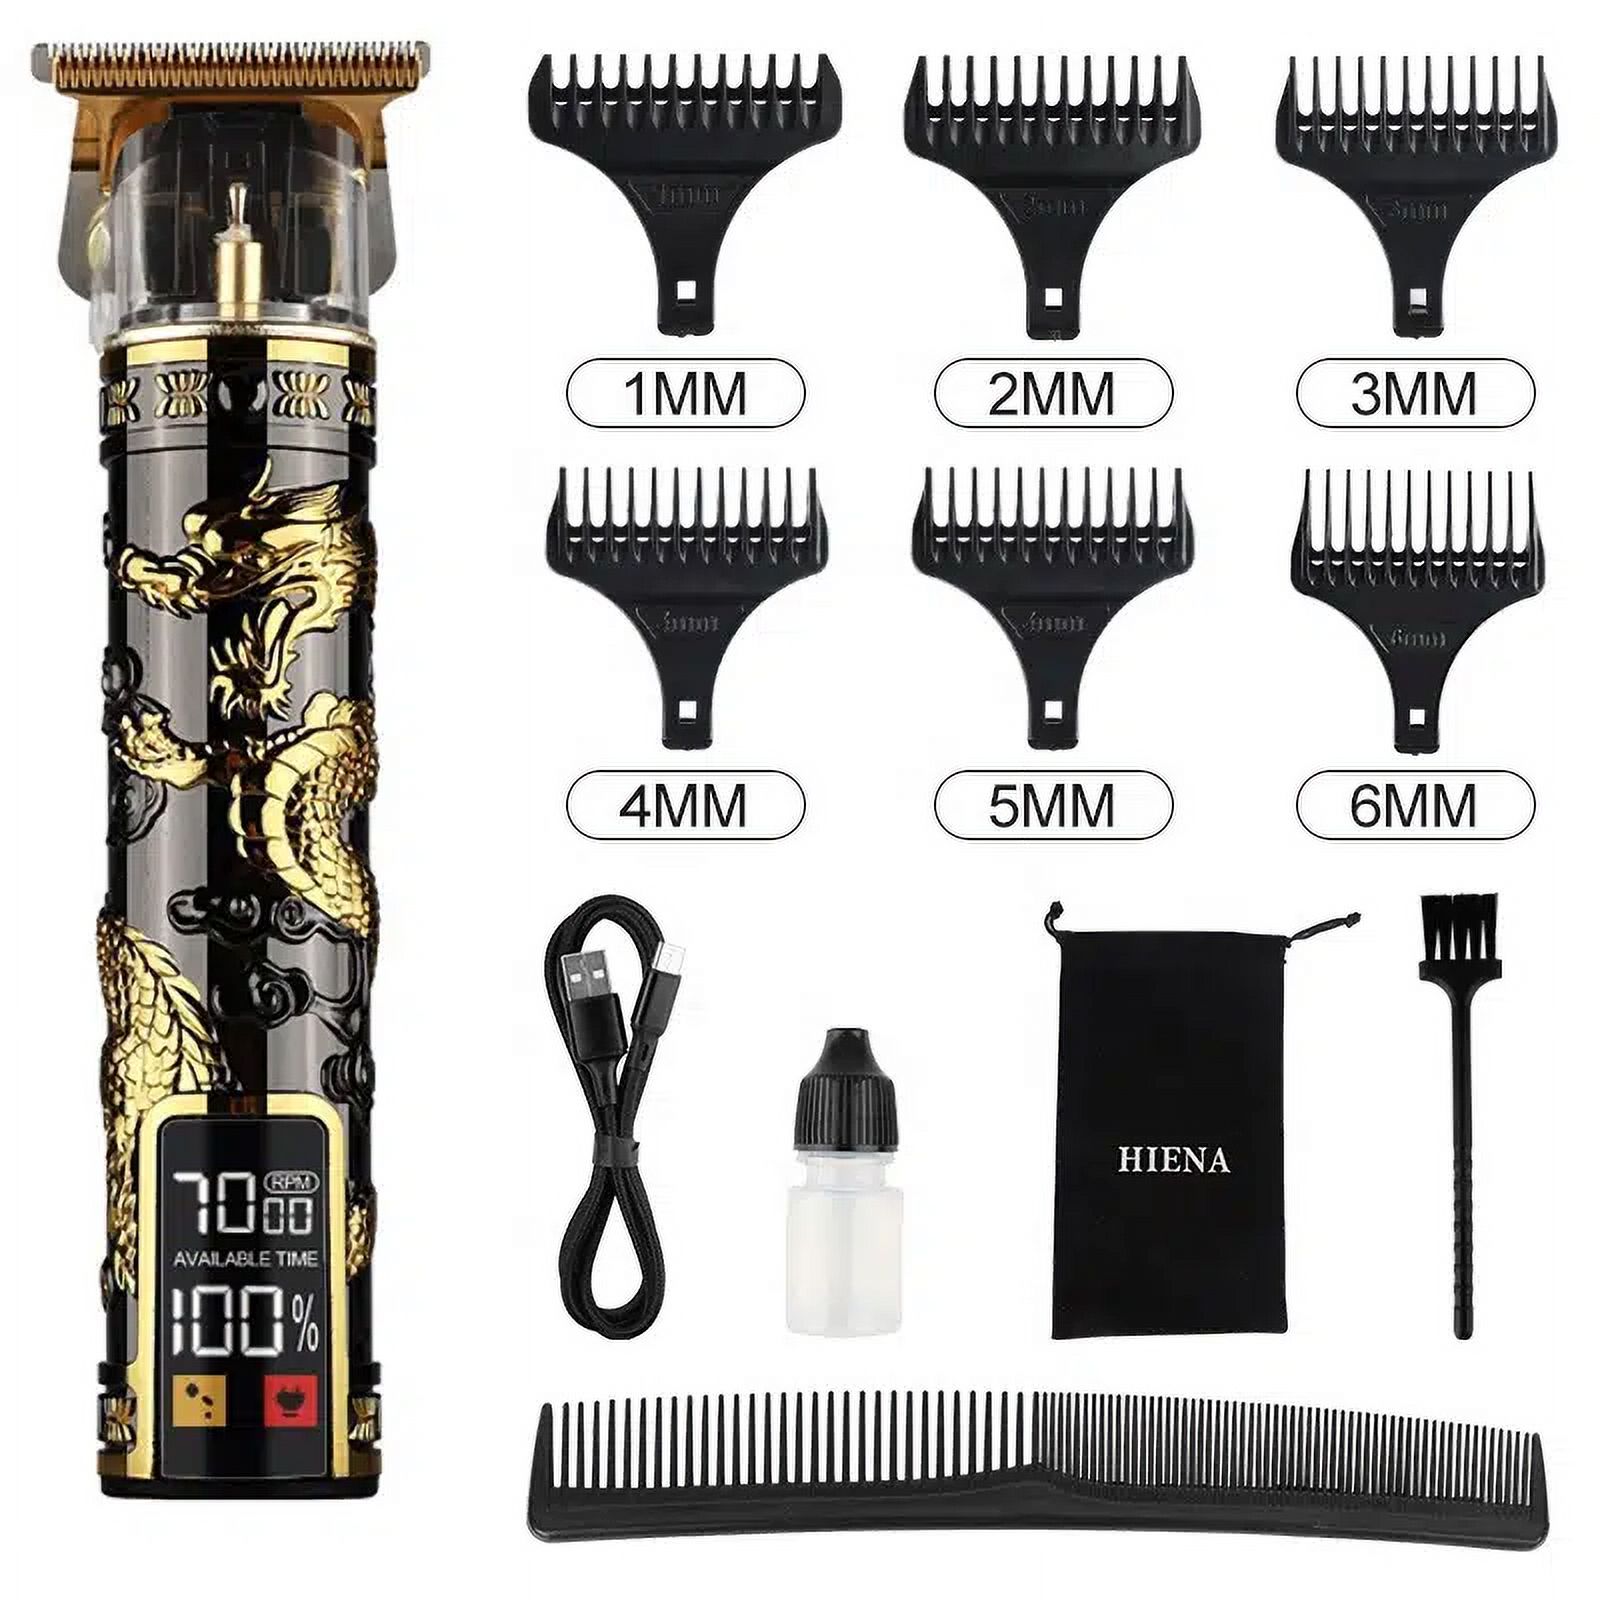 Hair Clippers for Men, Rechargeable cordless professional LCD display hair clipper men barber shop fade hair trimmer electric hair cutting machine